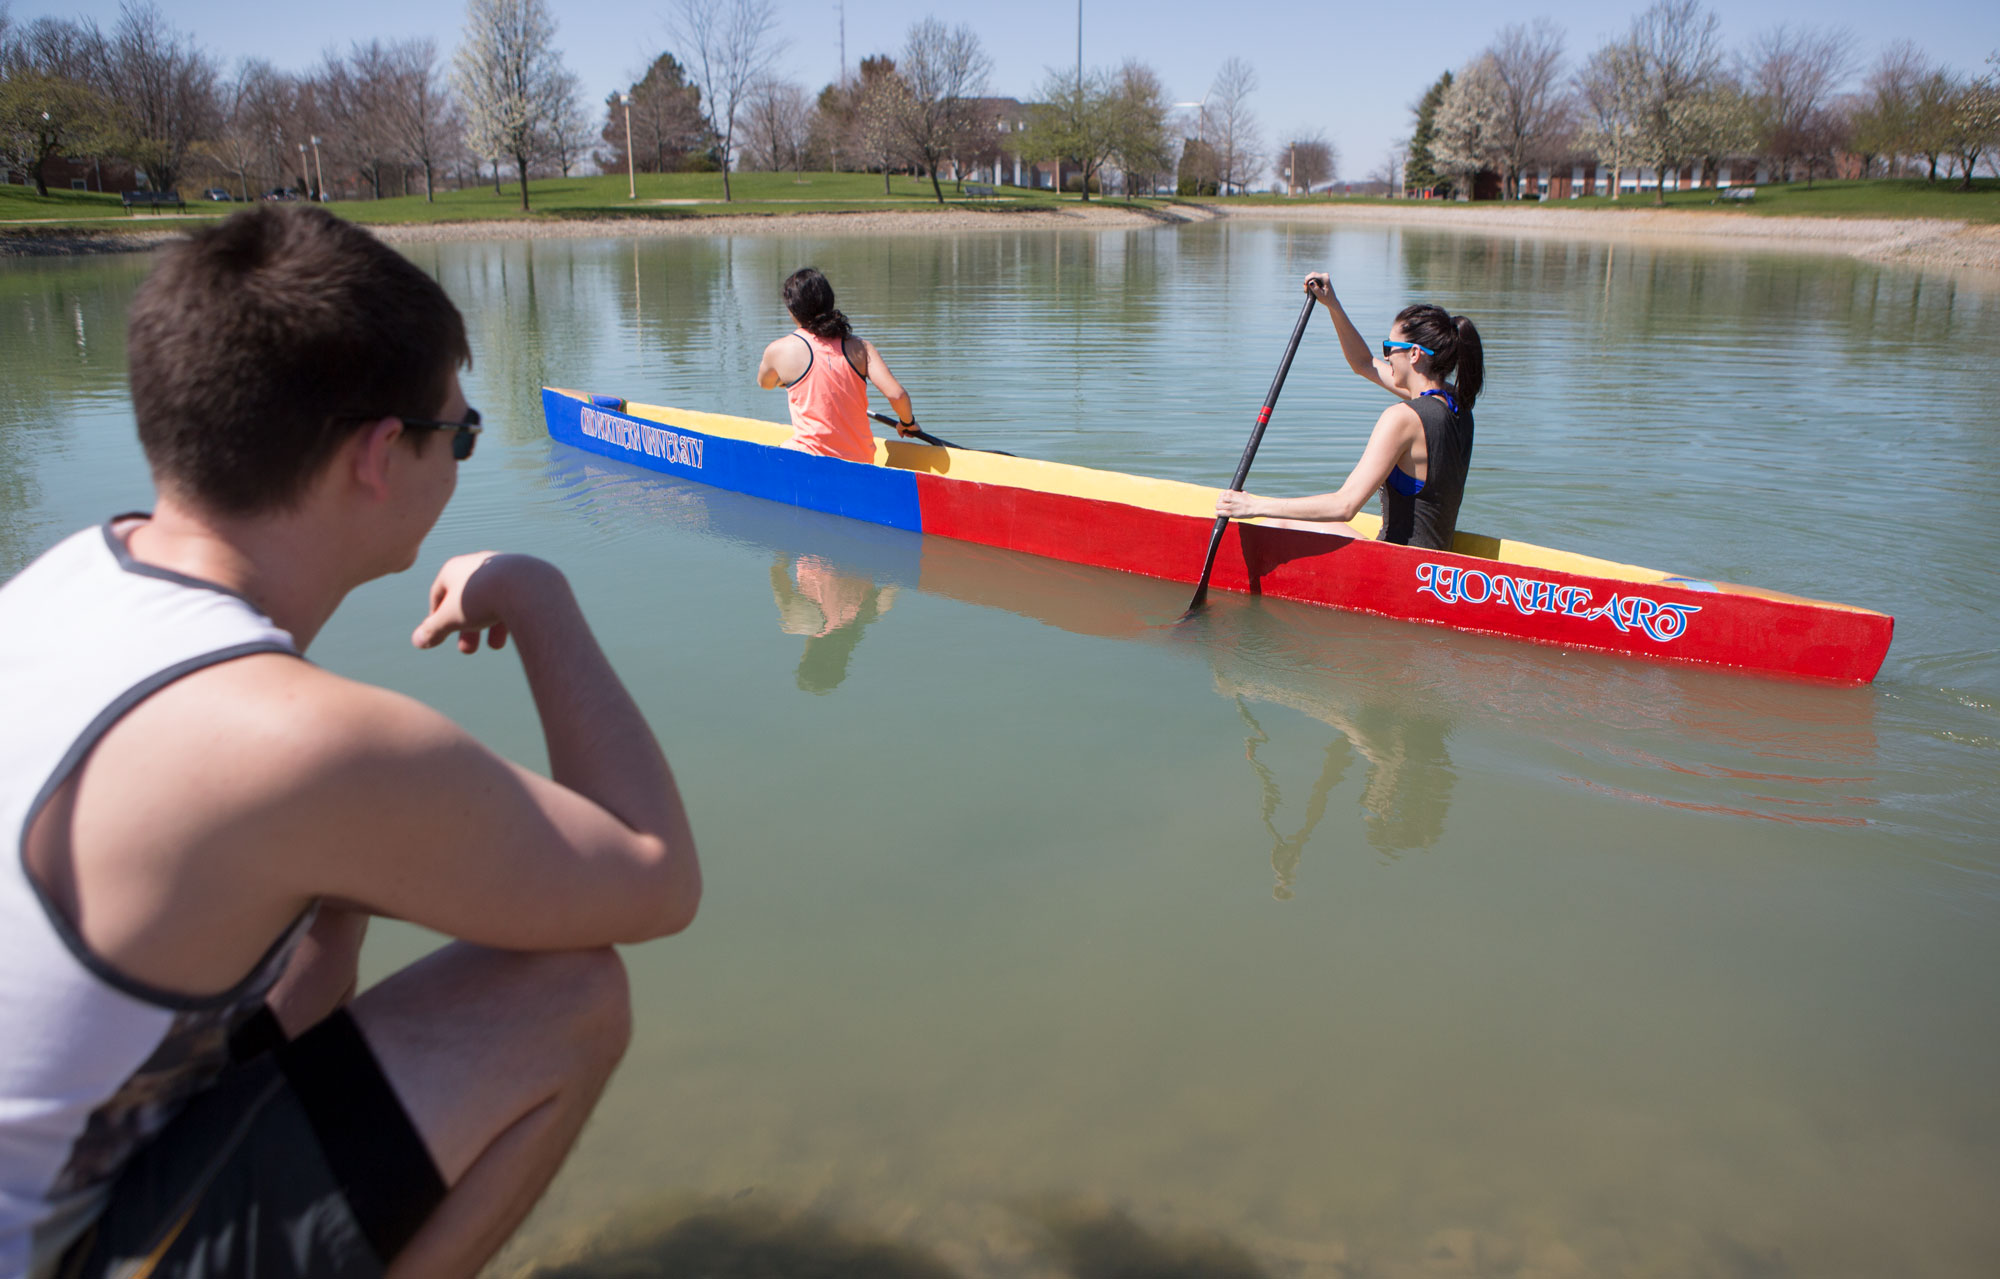 ONU engineers build canoes from concrete